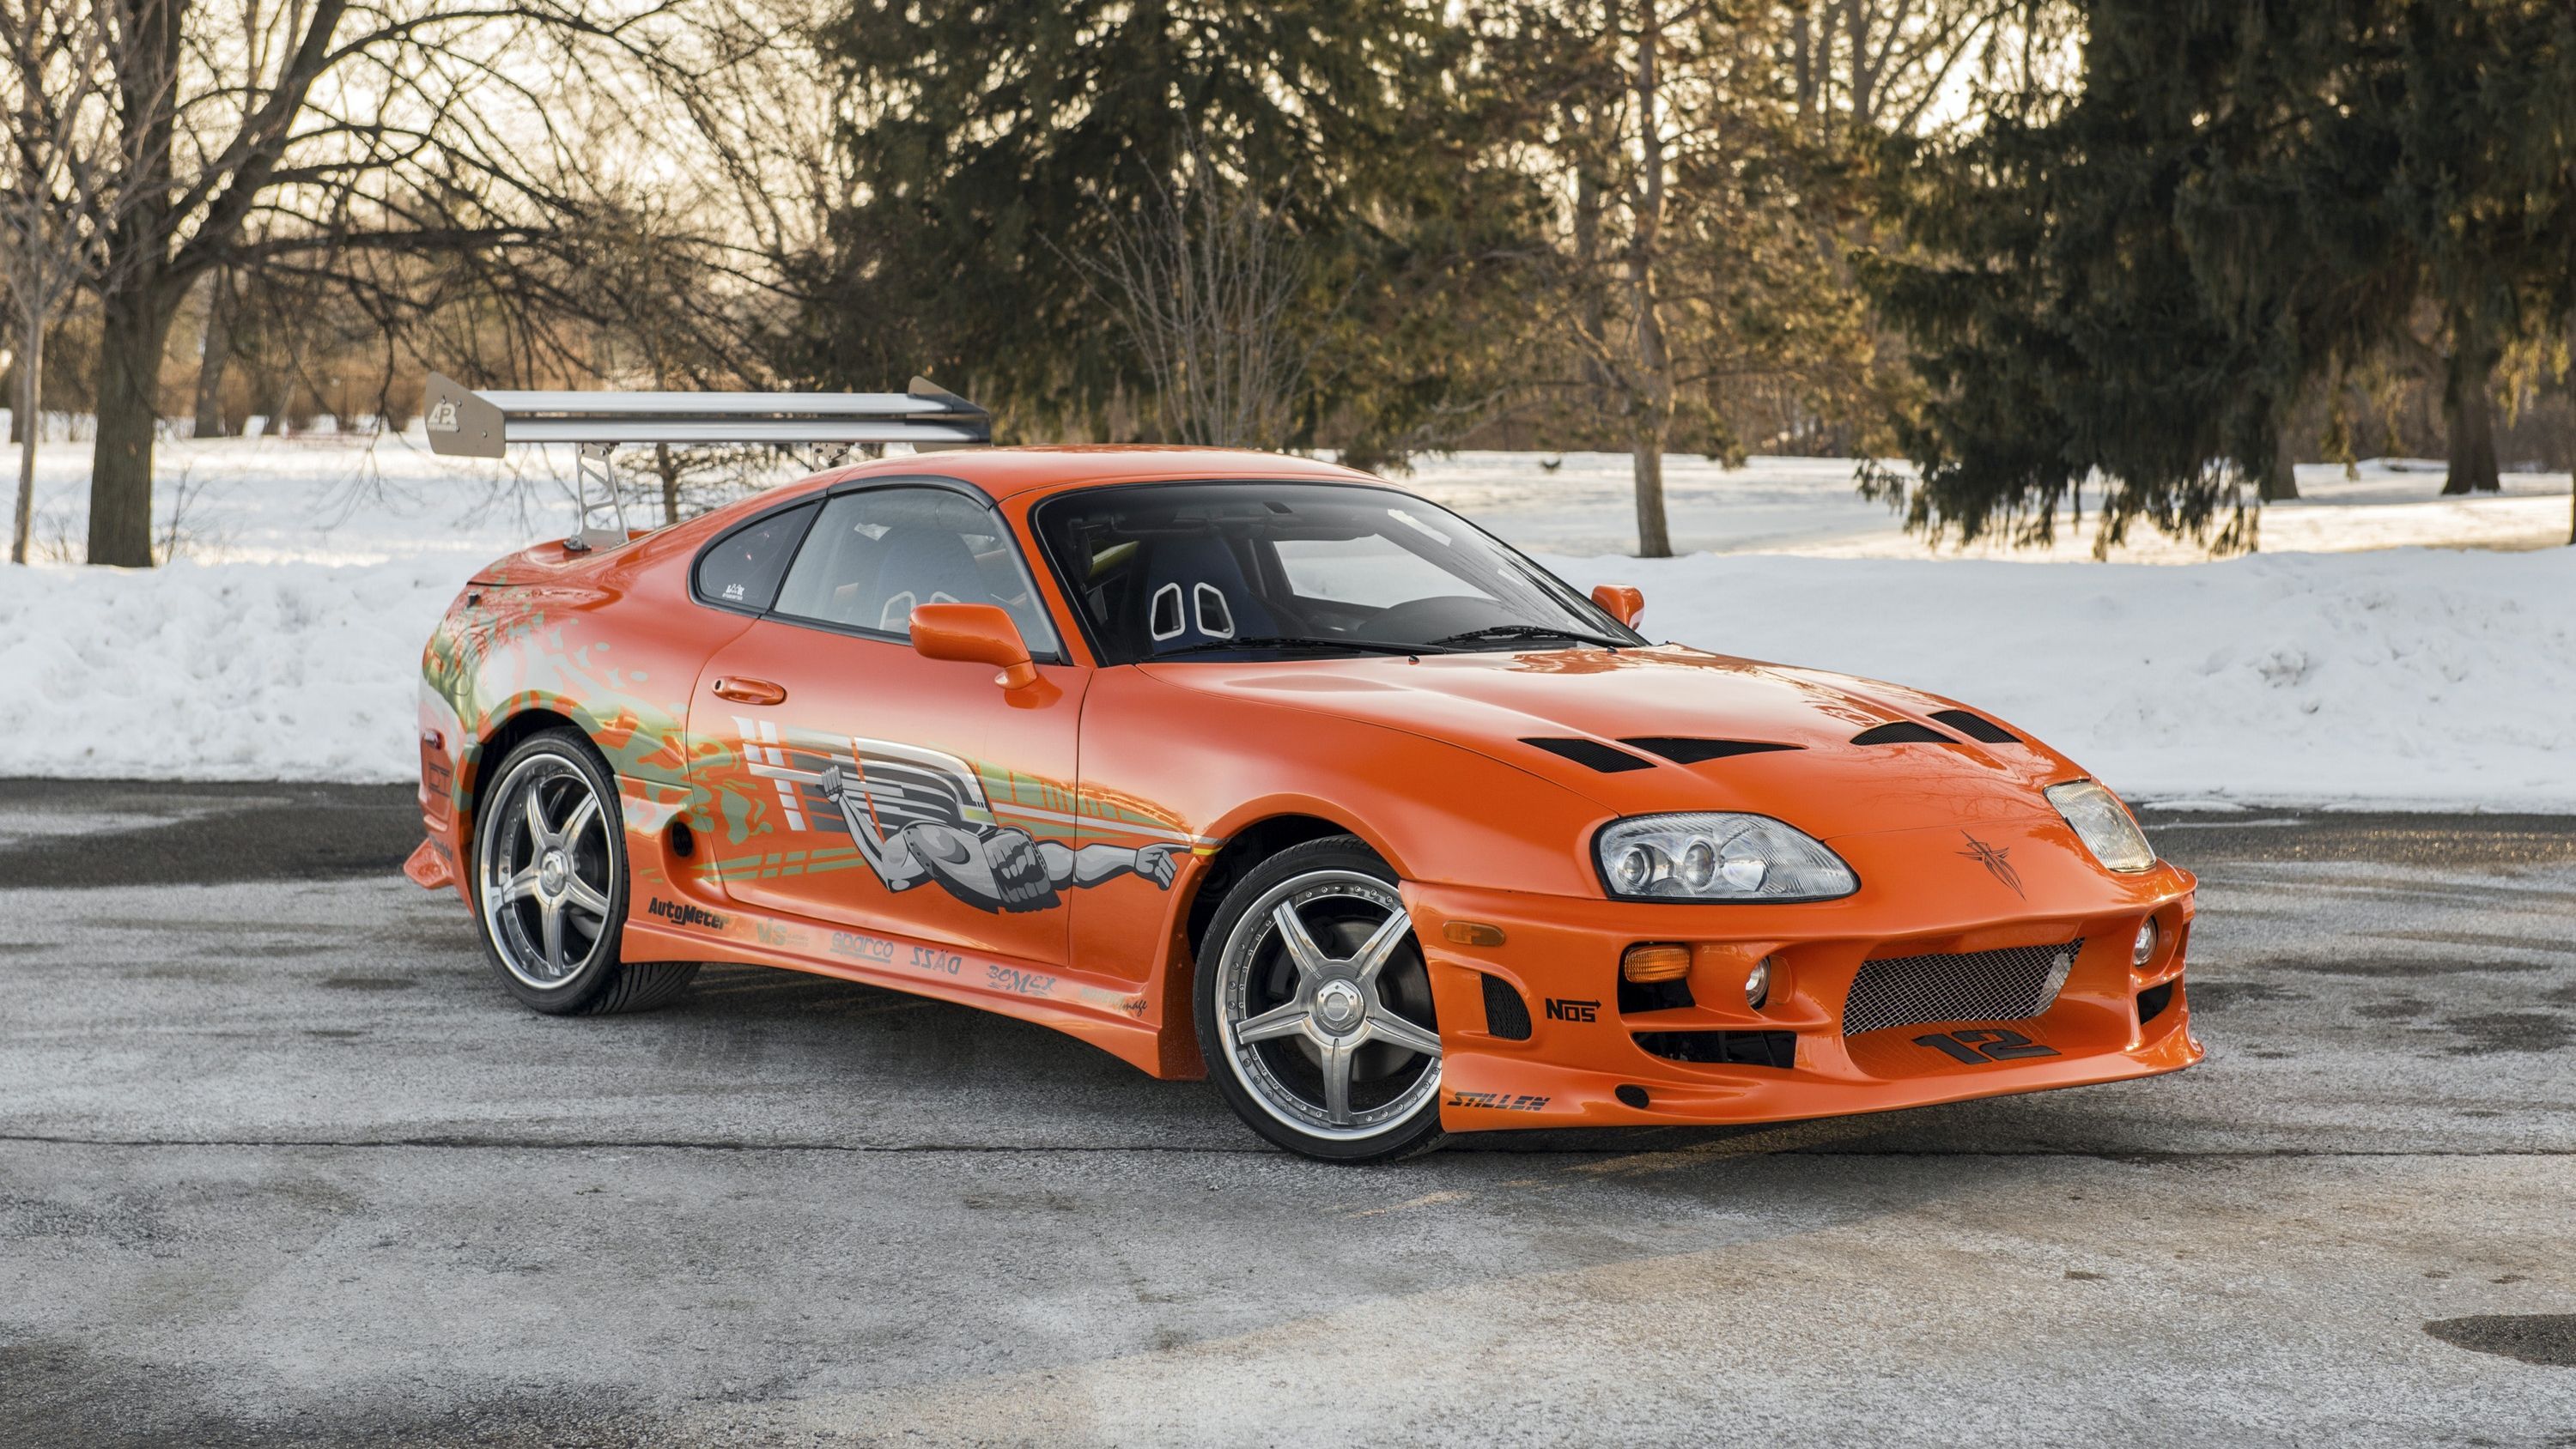 The Fast and the Furious supra